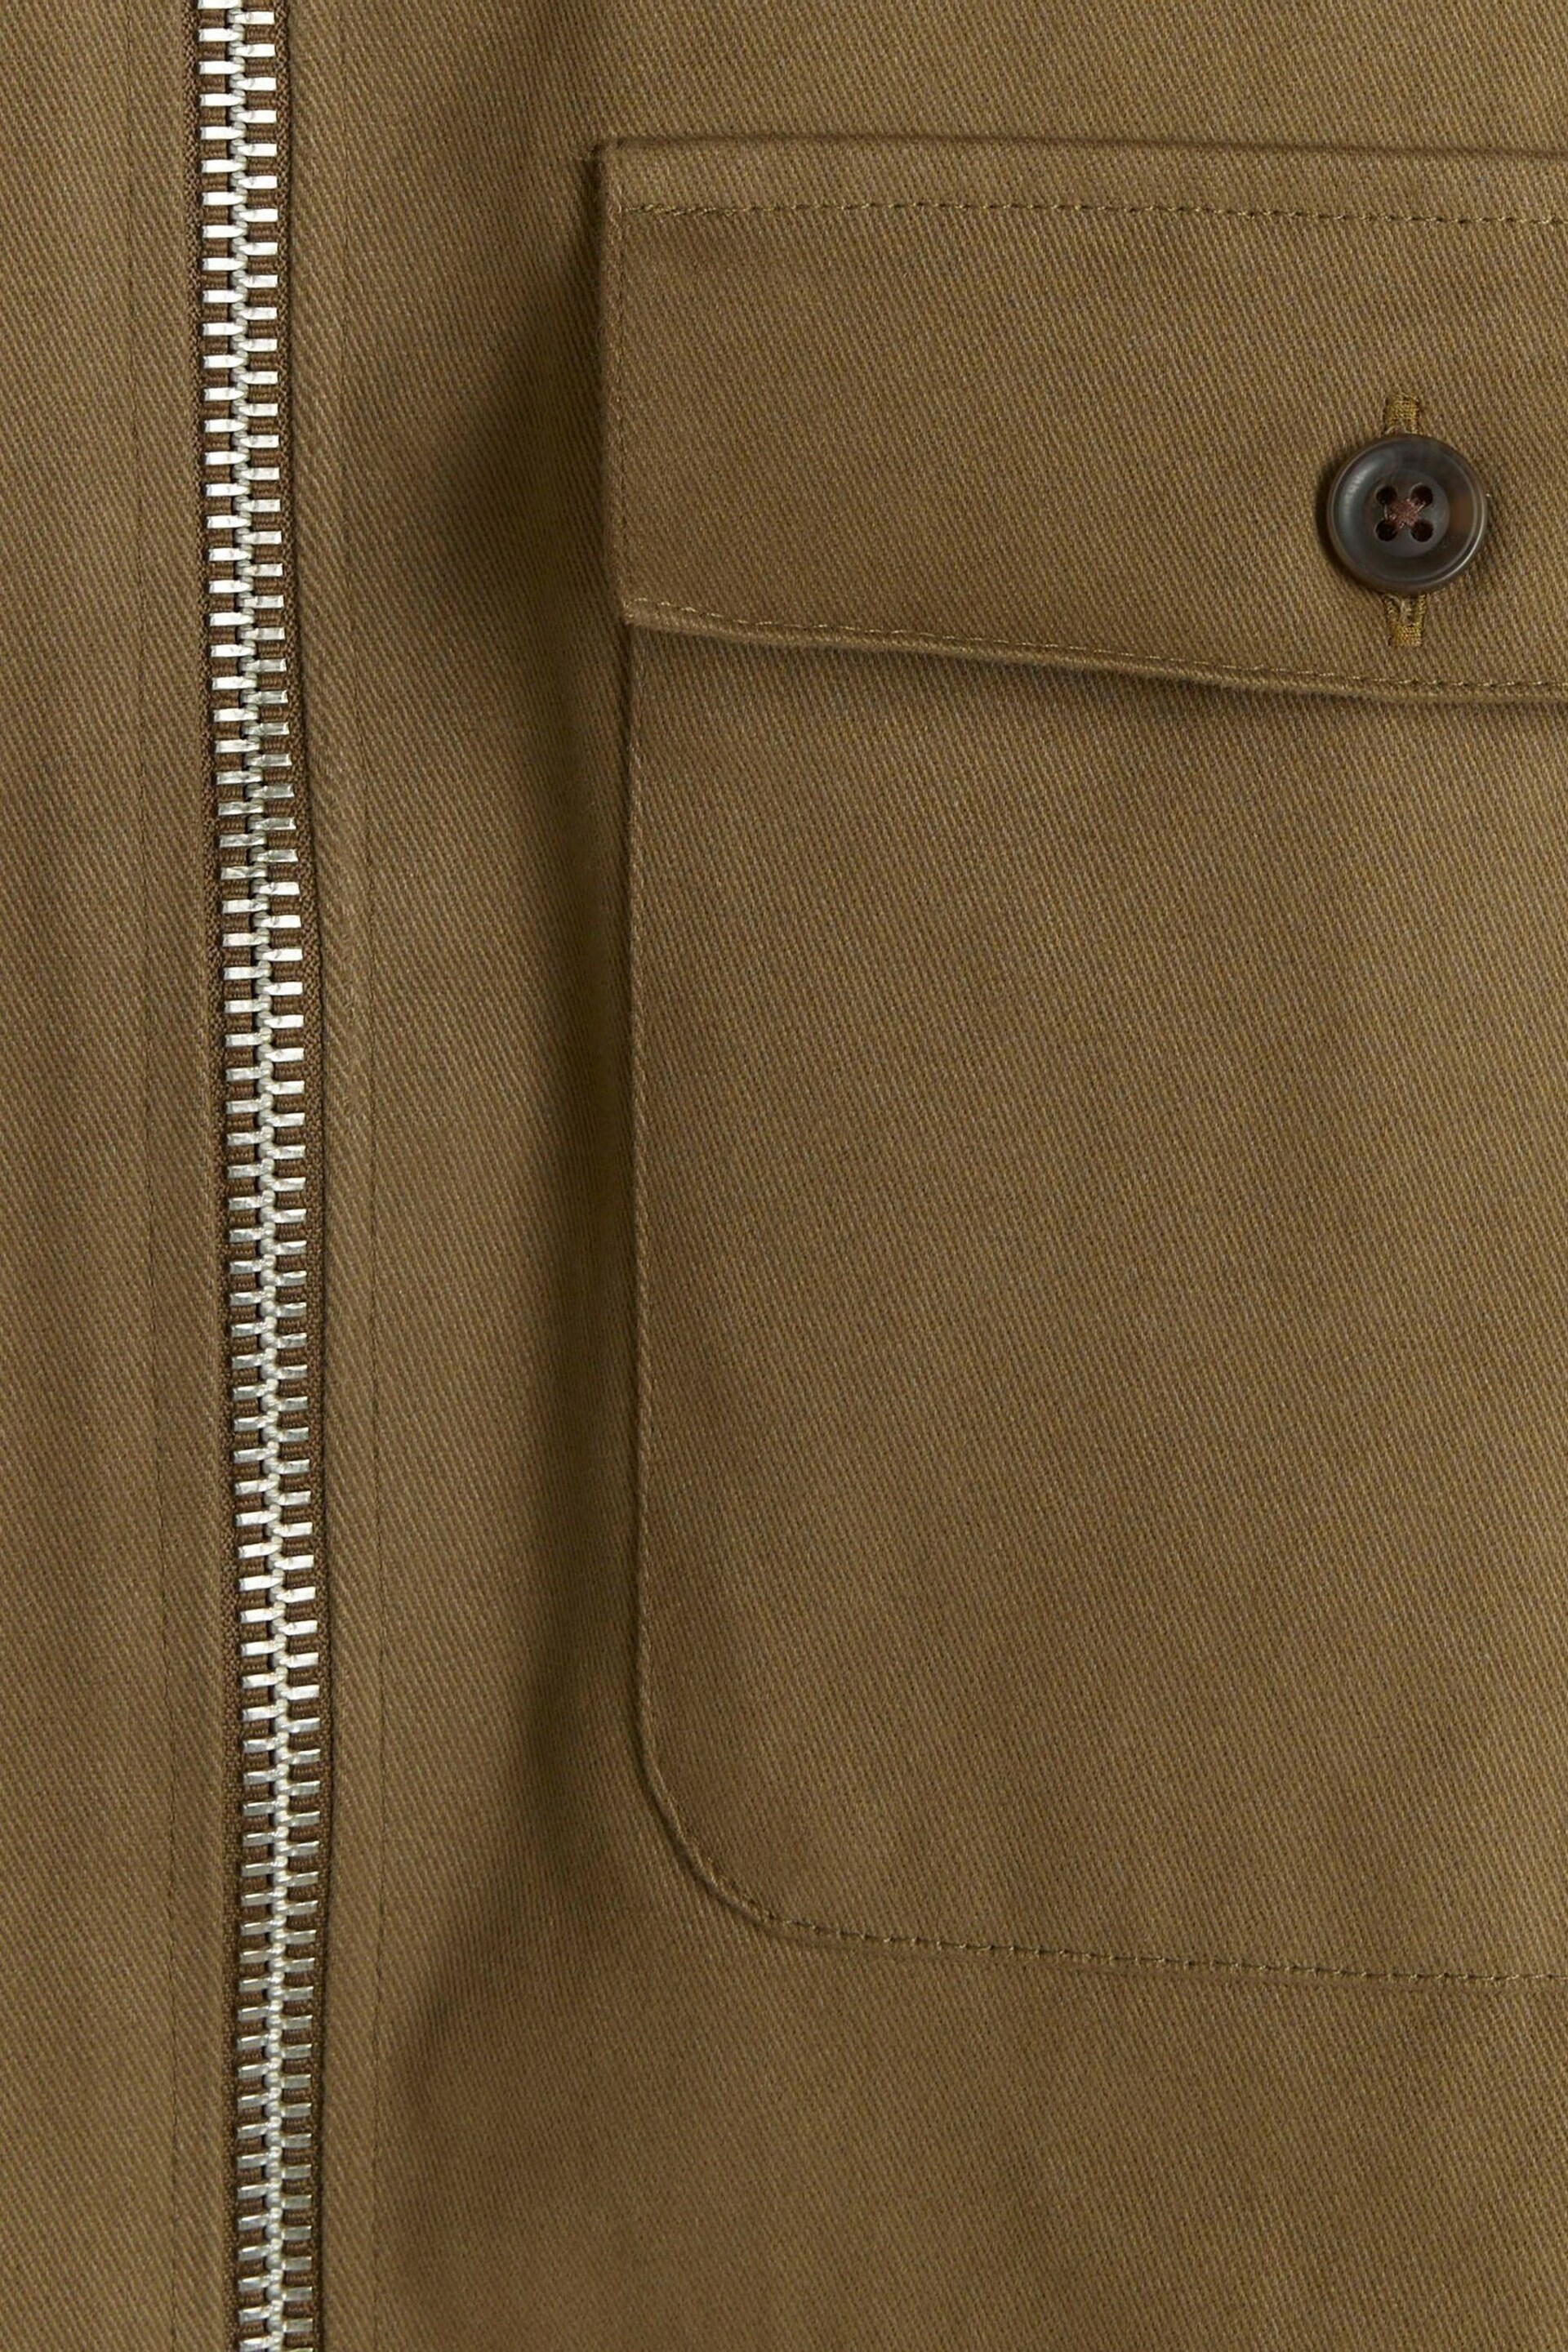 River Island Brown Zipper Front Overshirt - Image 6 of 6